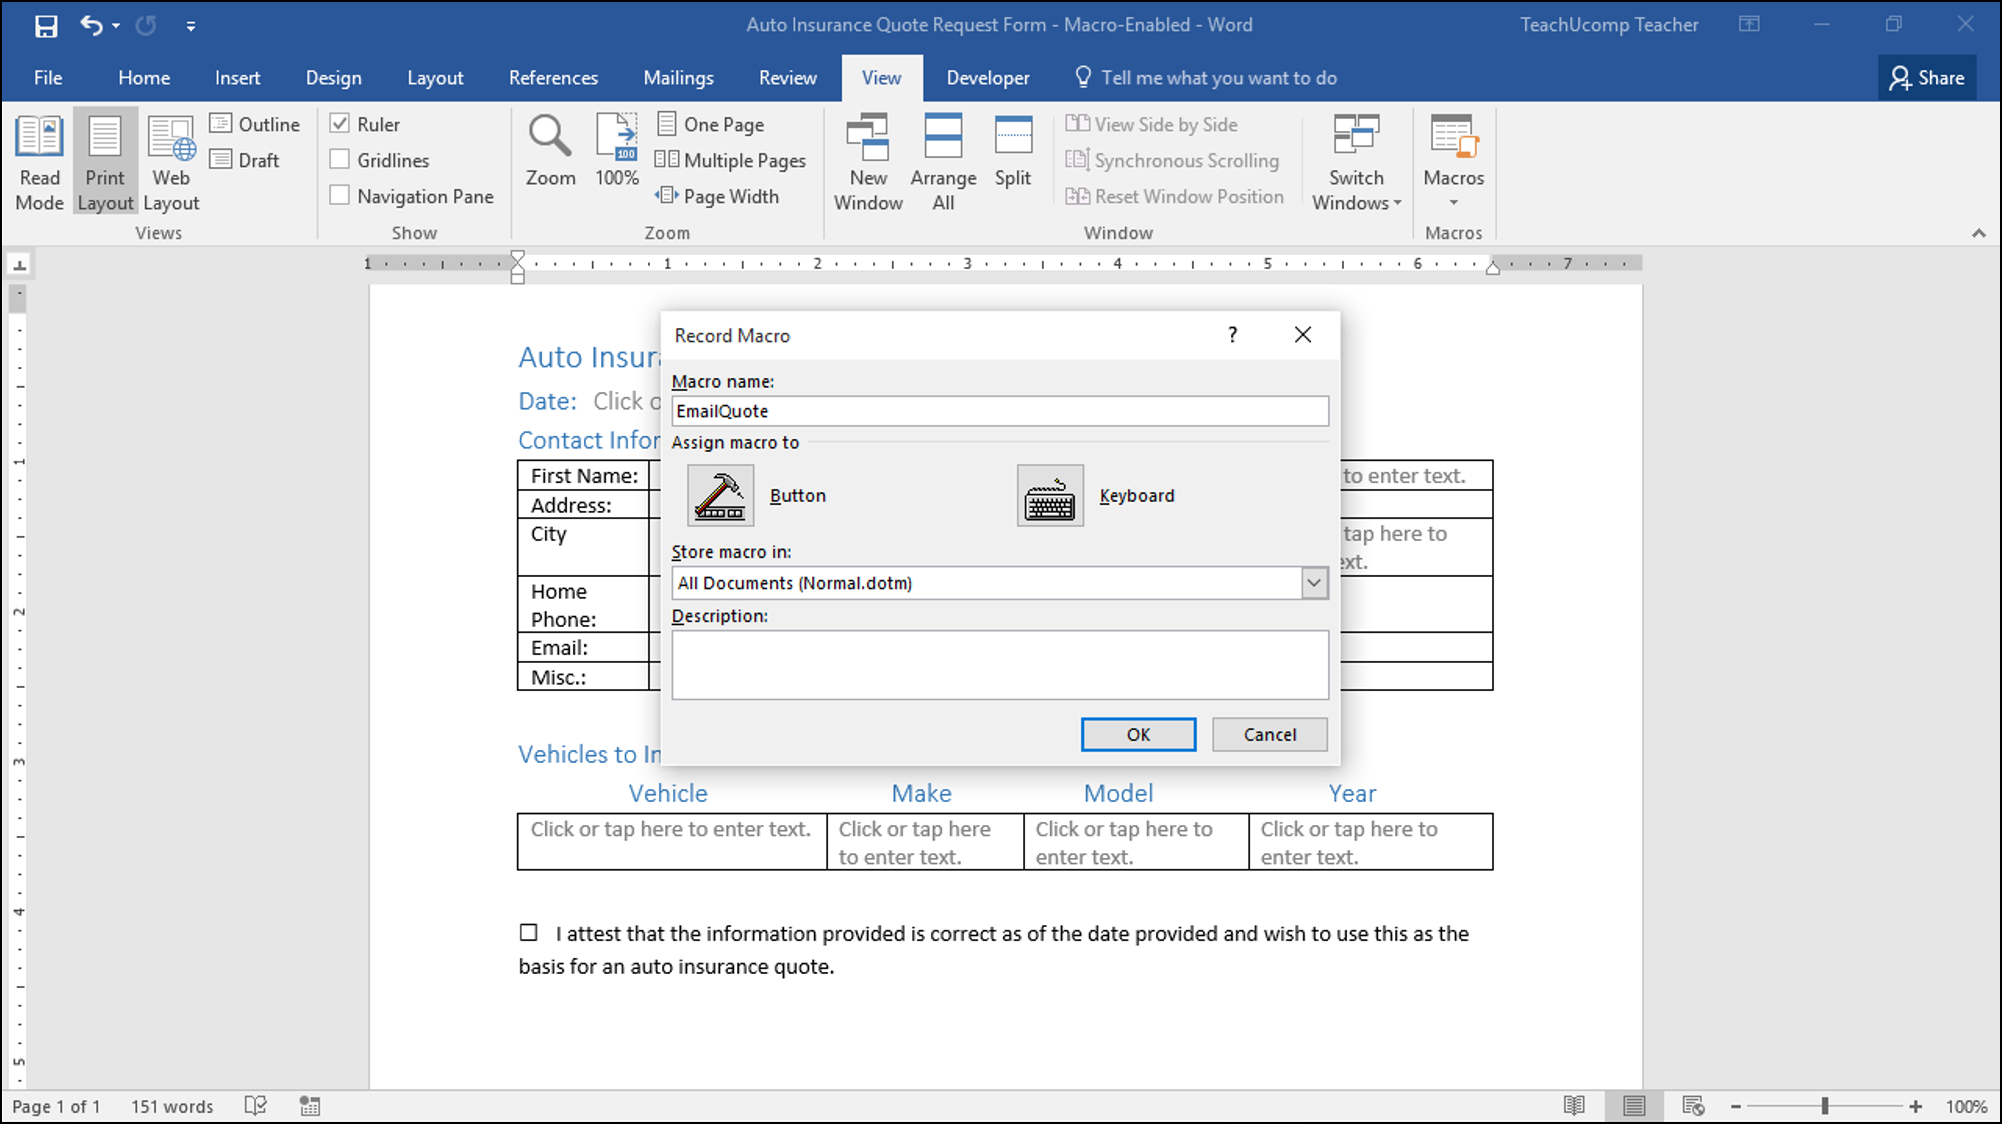 Record A Macro In Word – Instructions And Video Lesson For Word Macro Enabled Template